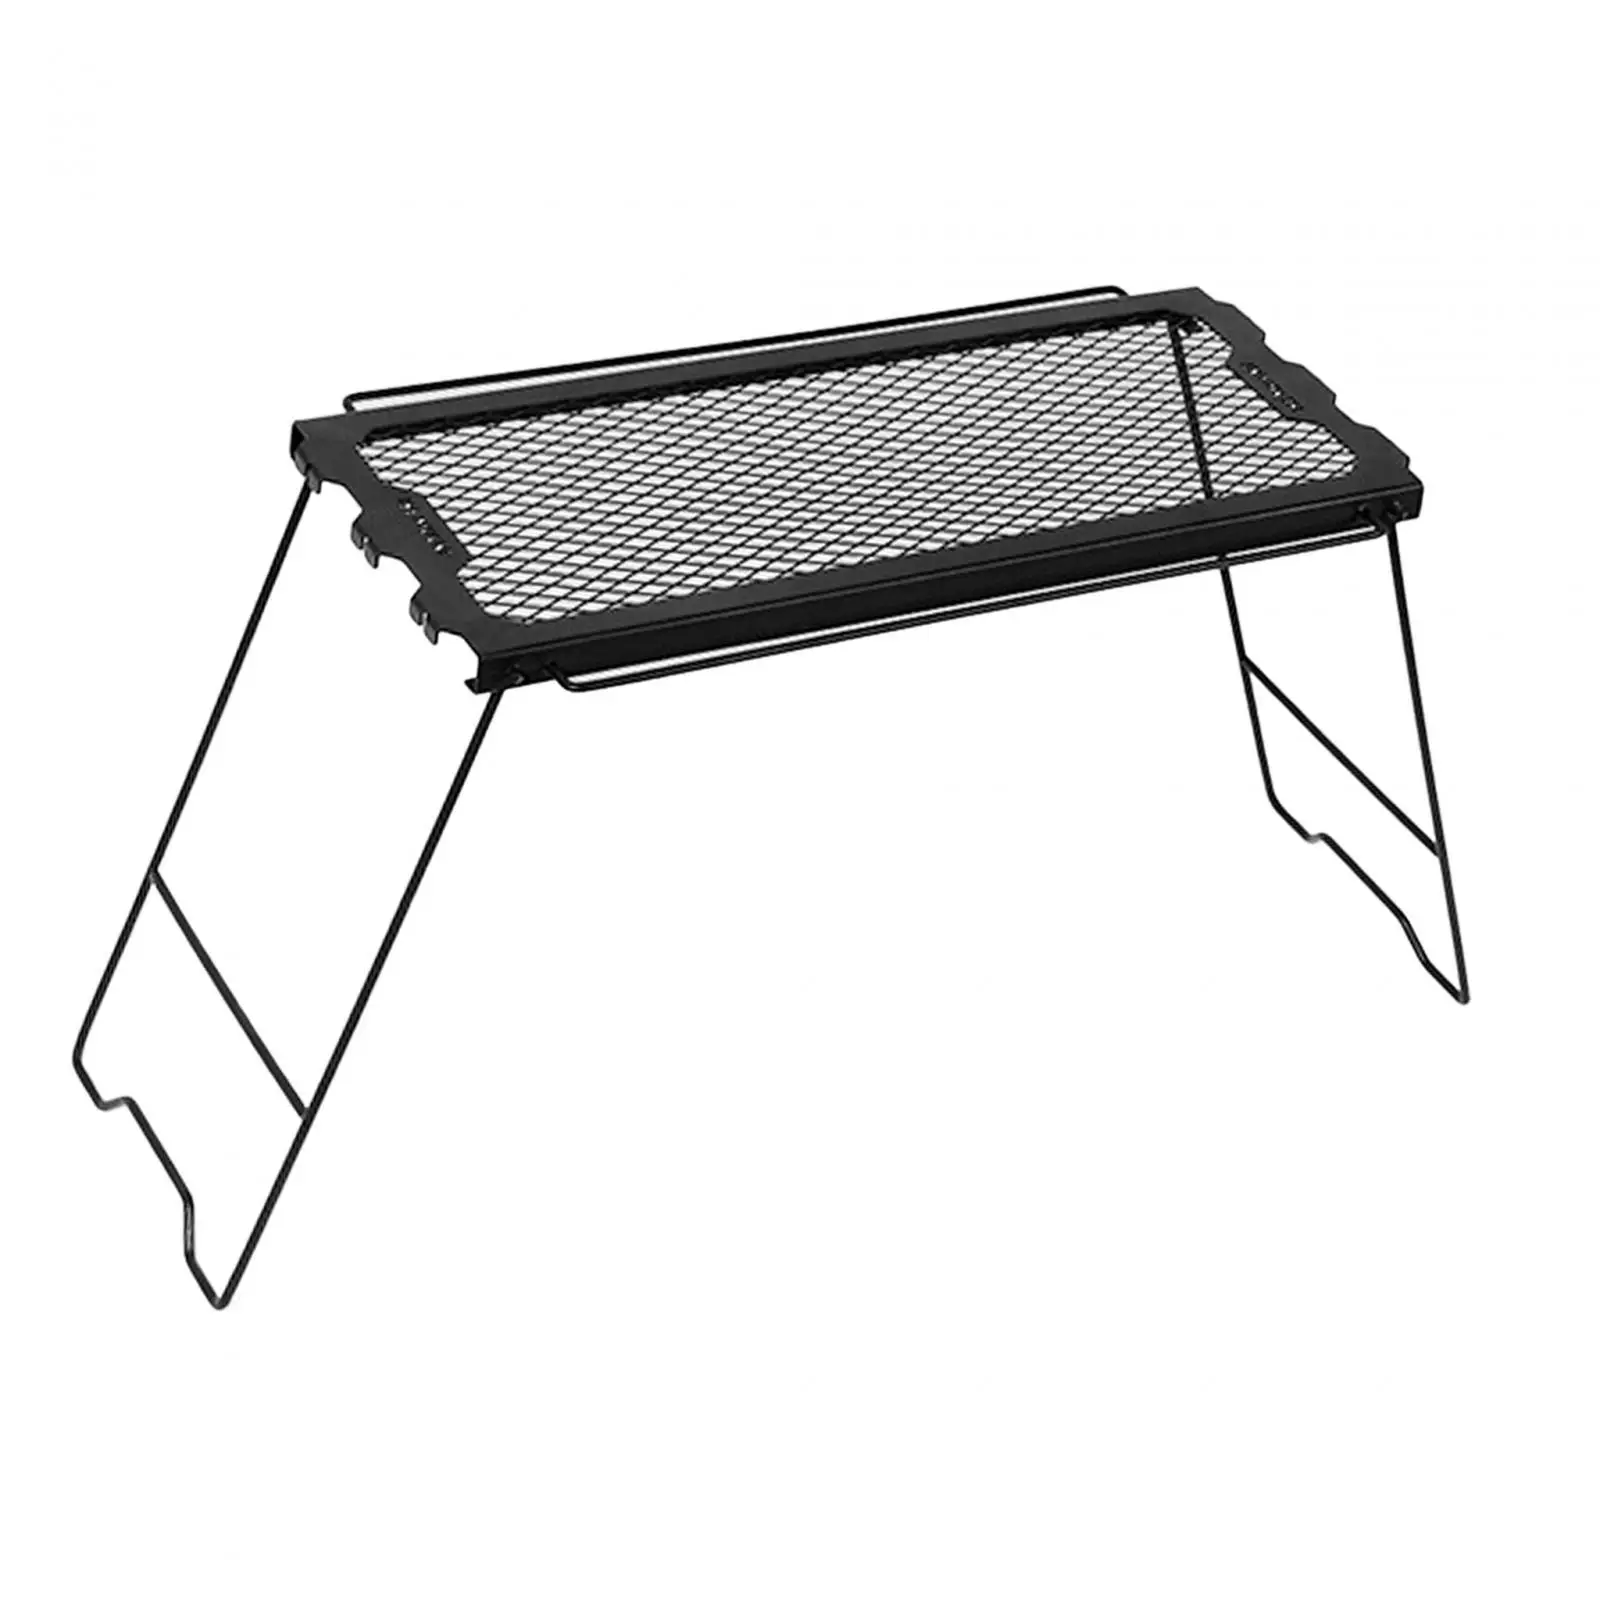 Folding Camping Table Camping Cooking Grate over Fire Foldable Outdoor Picnic Foldable Campfire Grill for Indoor BBQ RV Patio